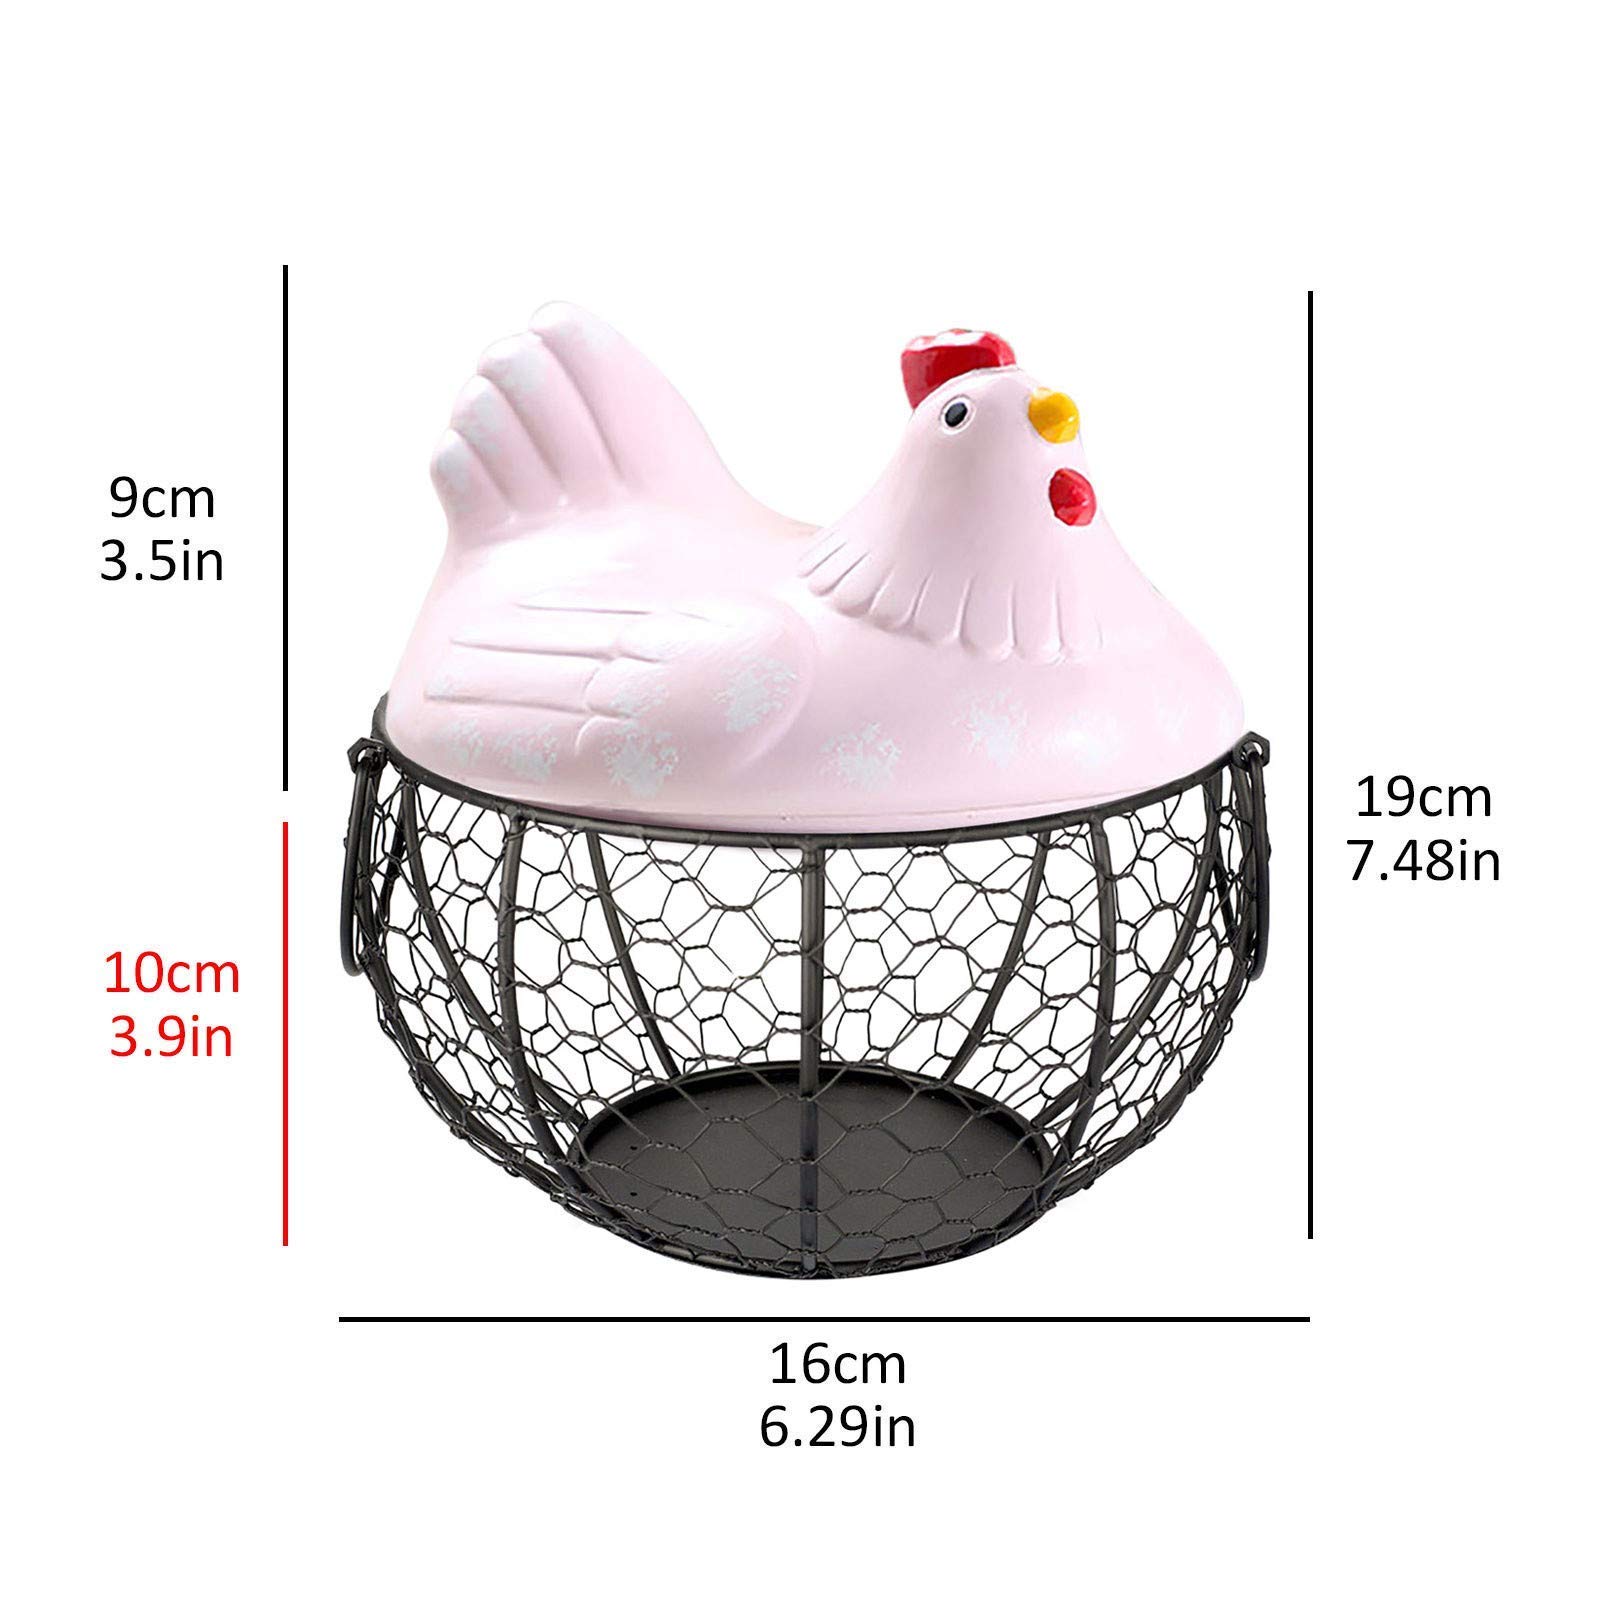 Qube Eggs Basket,Eggs Storage Iron Basket with Ceramic Chicken Lid, Metal Wire Hen Egg Basket Container,Eggs Holder Box for Storing Fruits, Vegetables (Pink), 20 x 15 x 7.3 cm